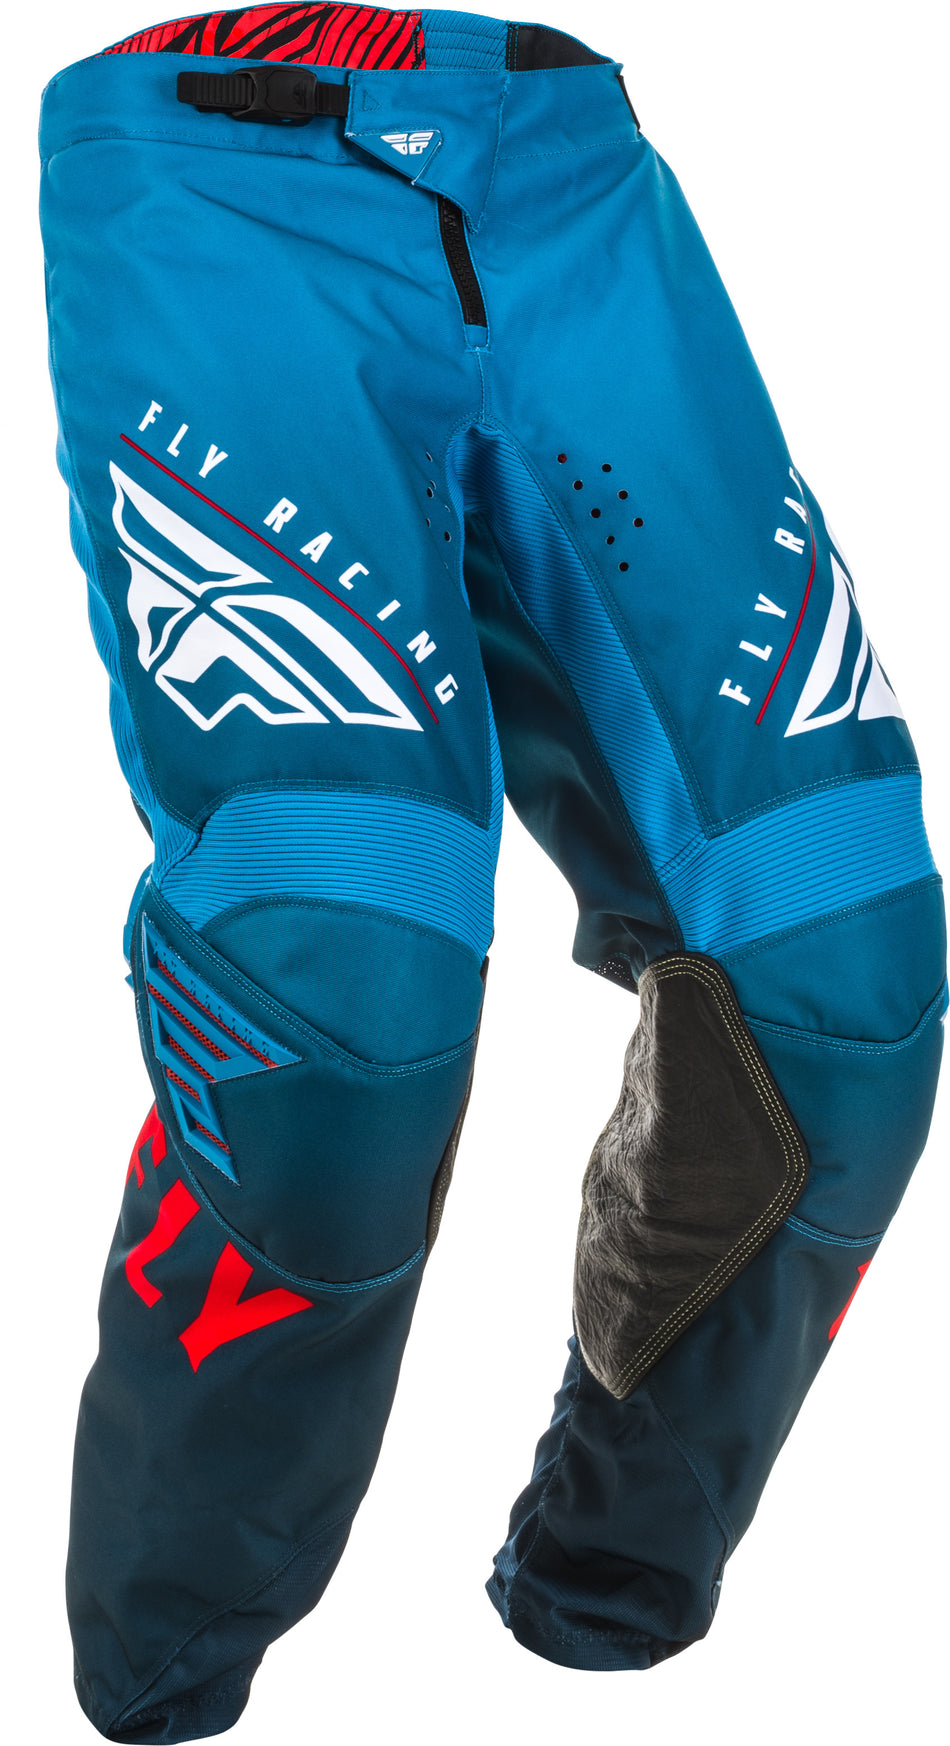 FLY RACING Kinetic K220 Pants Blue/White/Red Sz 40 373-53140